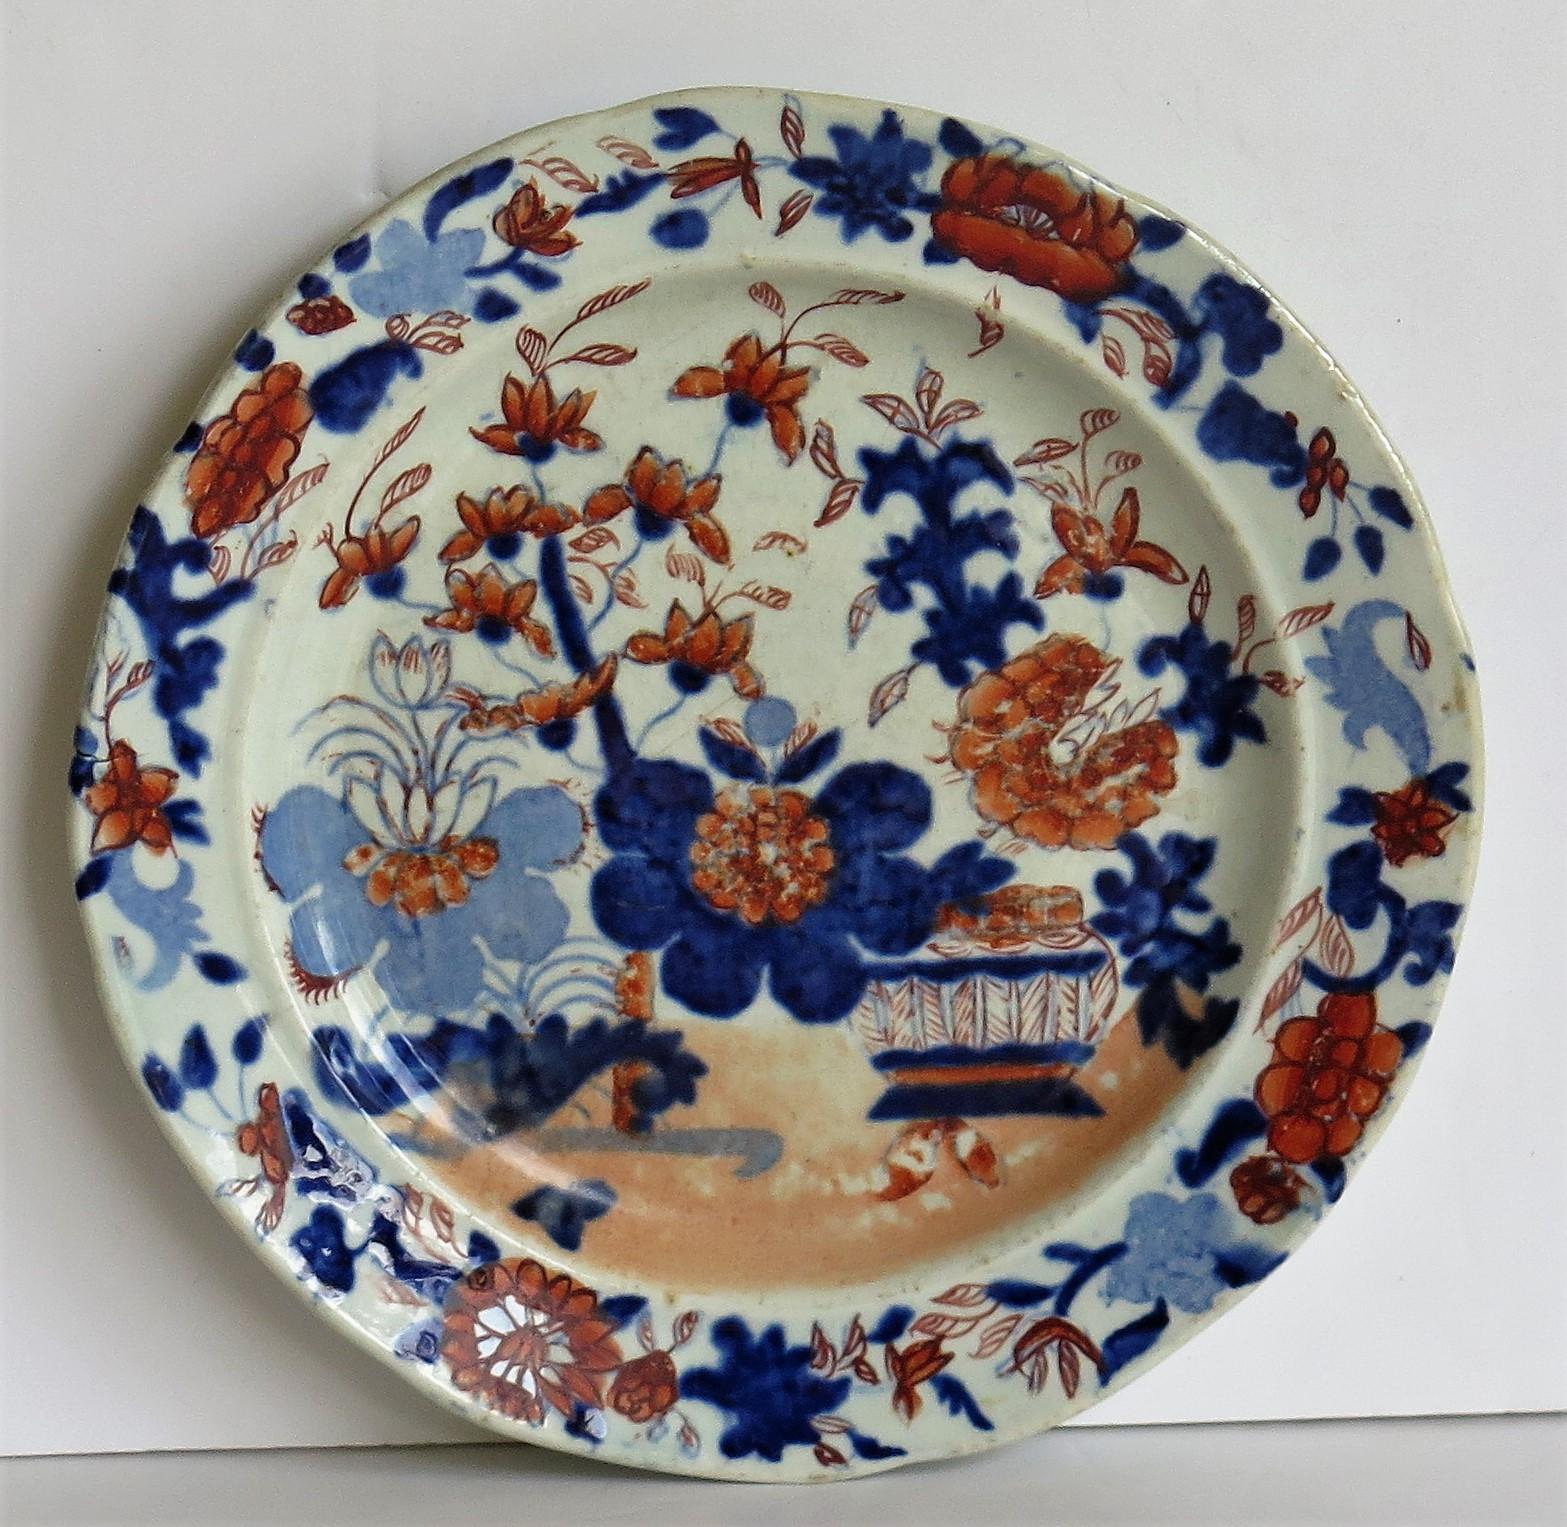 This is a good early pair of Mason's Ironstone pottery tea plates, hand painted in the very decorative Basket Japan pattern, produced by the Mason's factory at Lane Delph, Staffordshire, England, in the George 111rd period, circa 1813-1820.

The